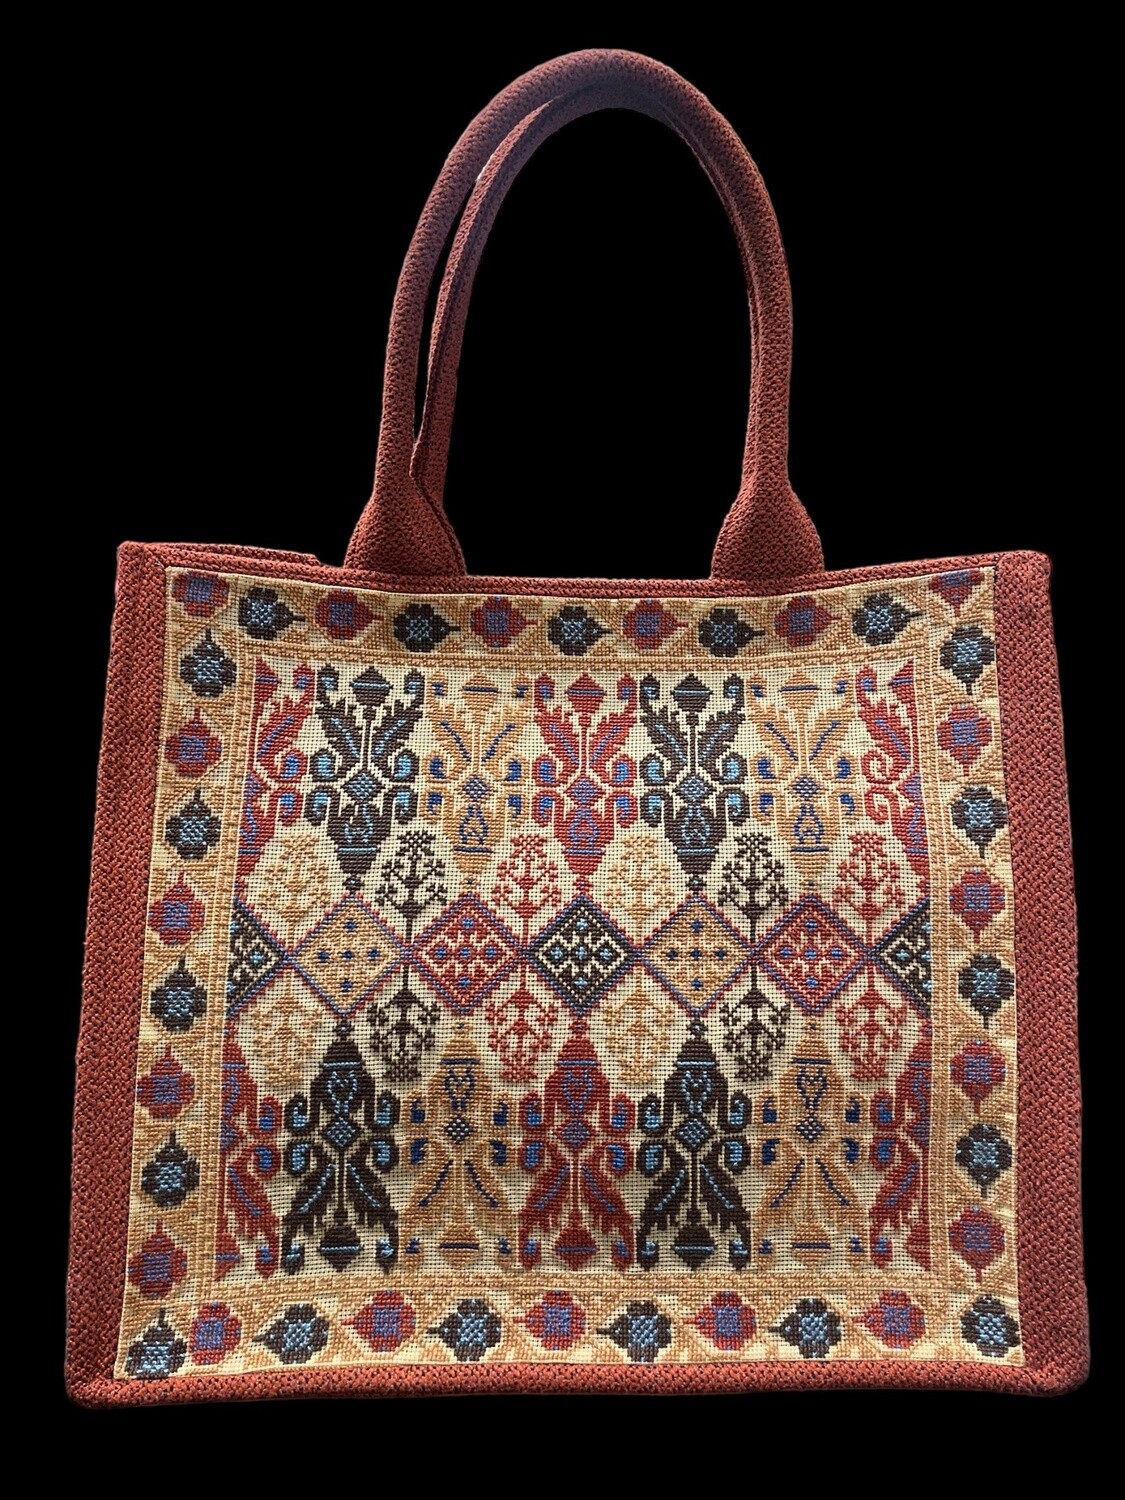 Brick tote bag with beige and blue embroidery